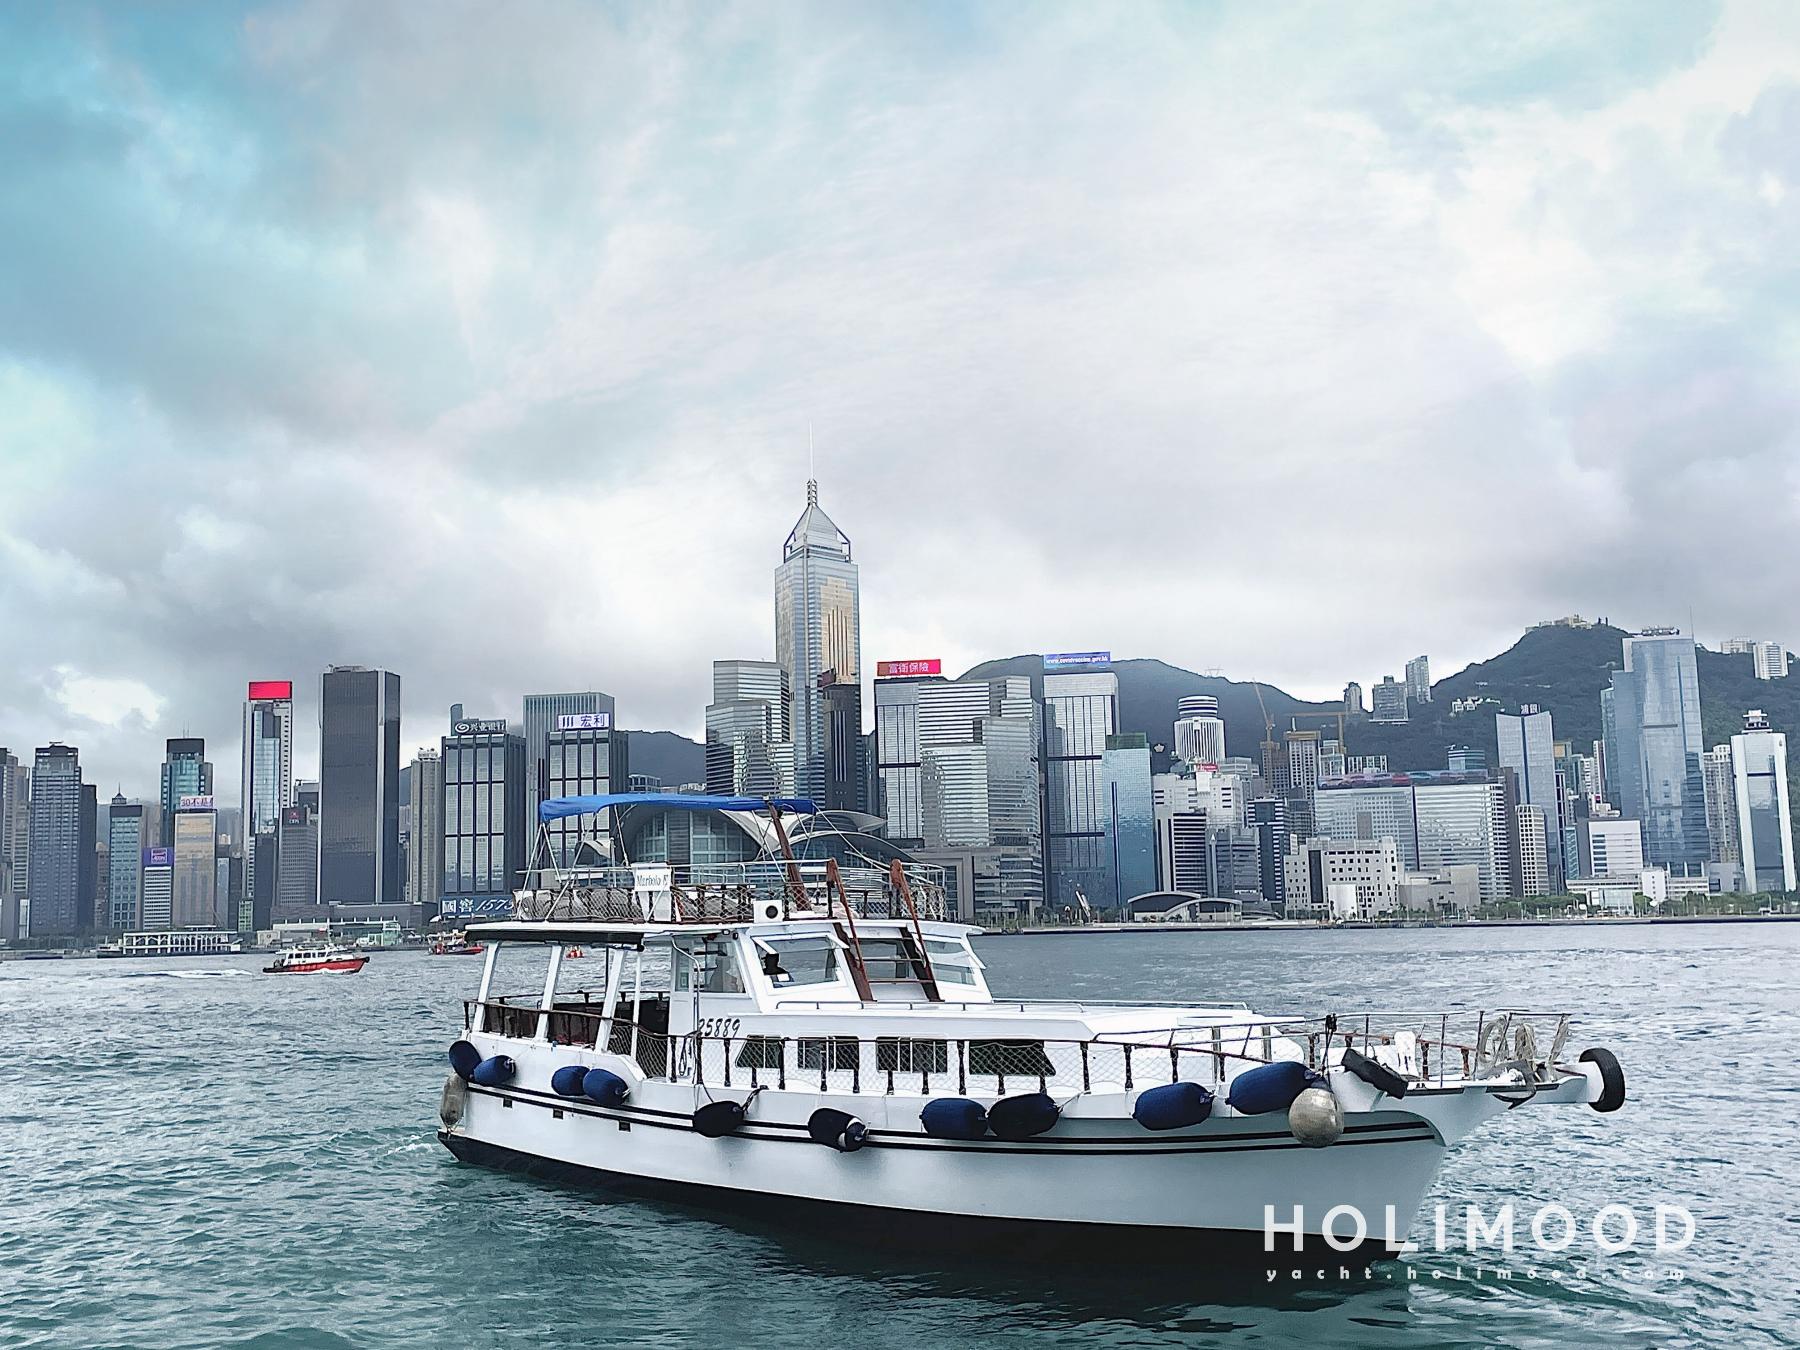 LT01 Pick up & drop off at Victoria Harbour , Spacious, from $428/ppl Boat Party All Inclusive Package (recommended for weekdays) 1